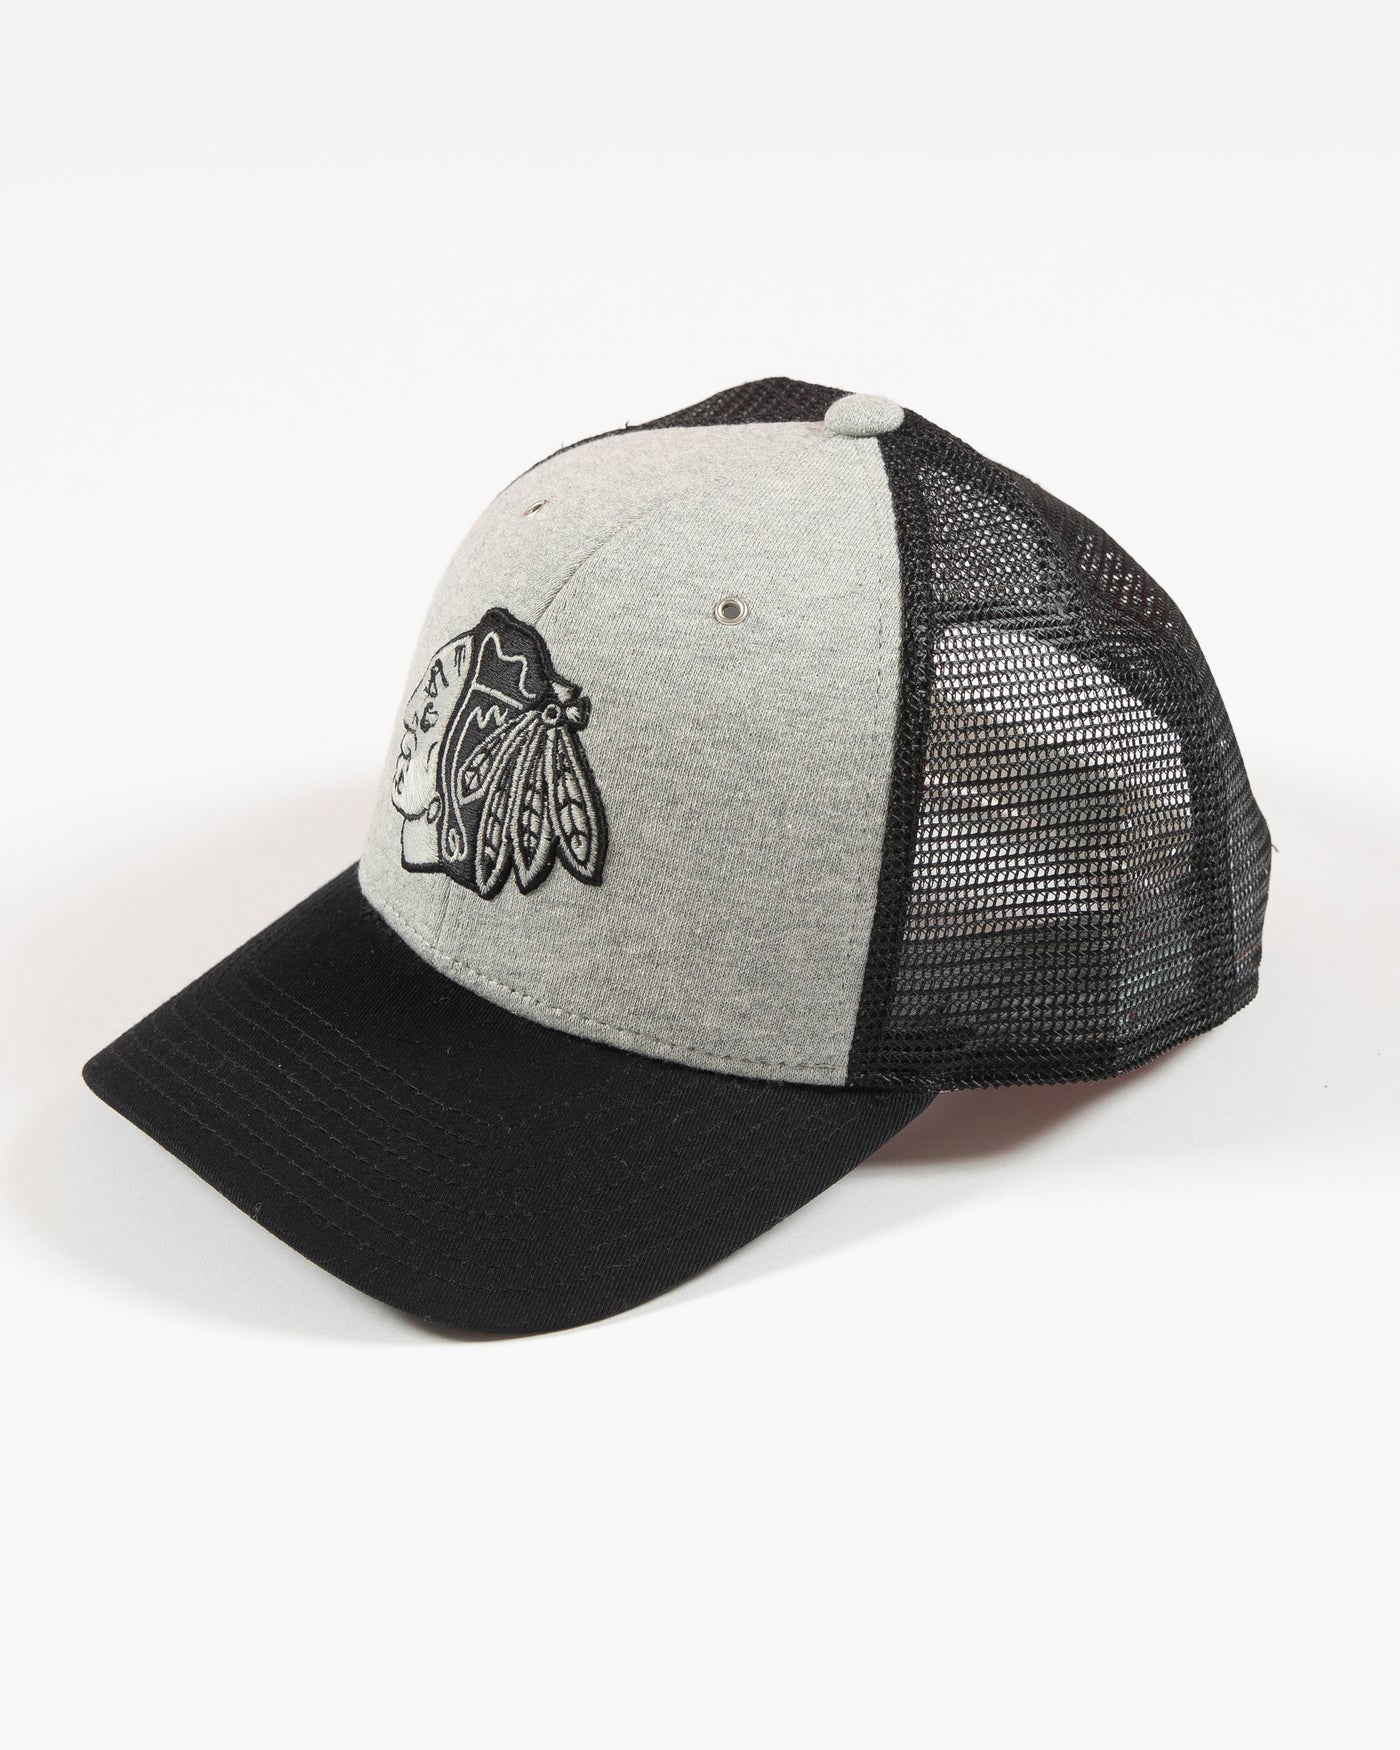 Grey CCM trucker cap with Chicago Blackhawks primary logo embroidered on front - left angle lay flat